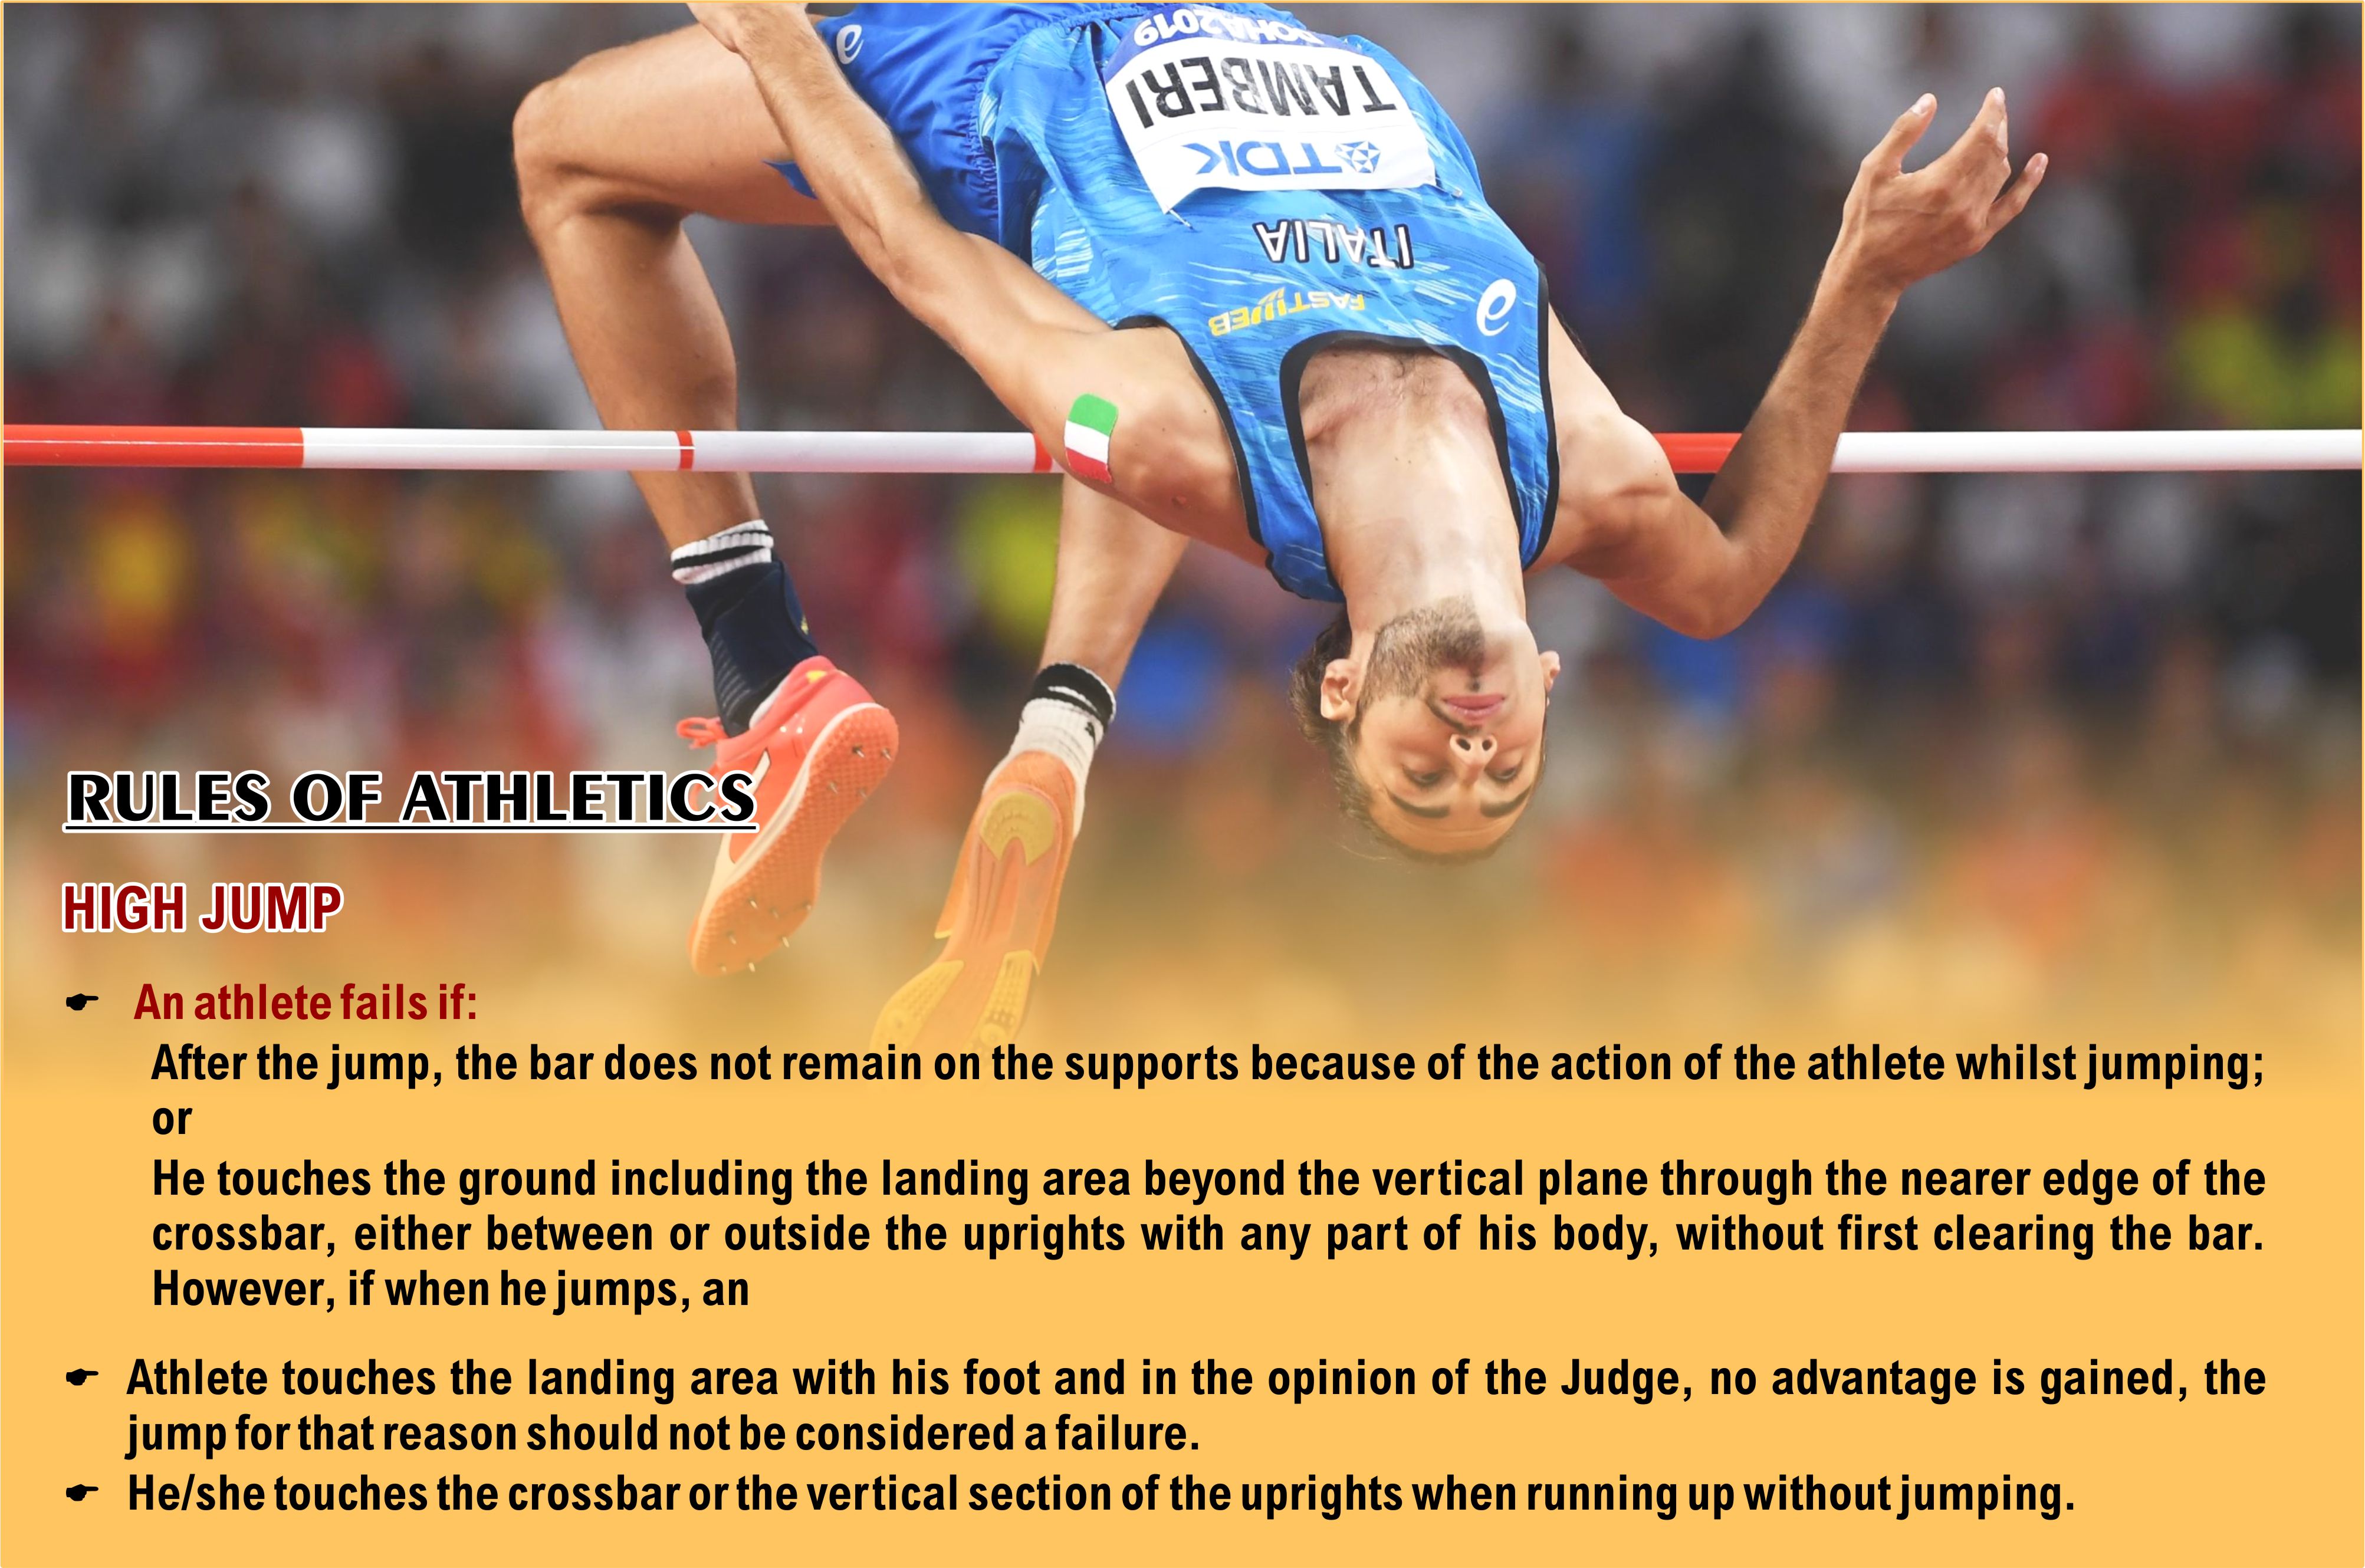 High jump rules and regulations